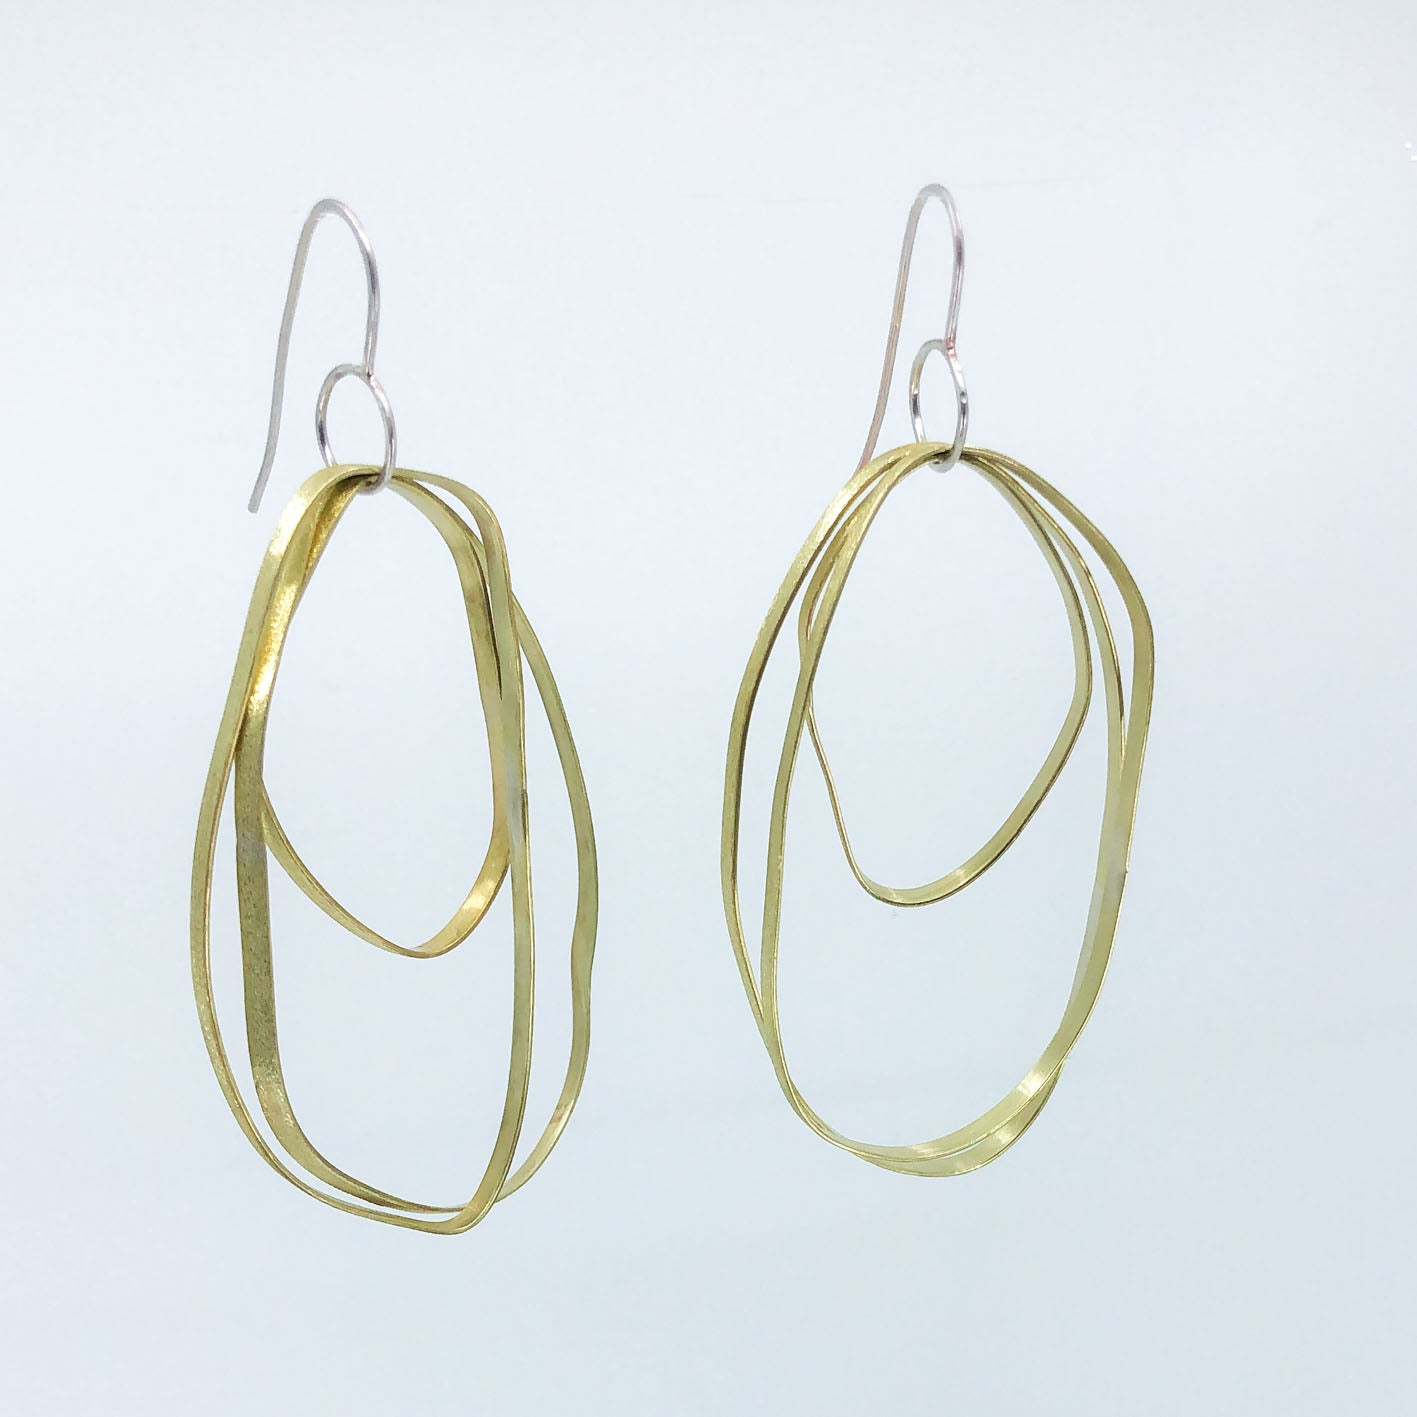 long dangling brass earrings with sterling silver hook • three textured free form elements